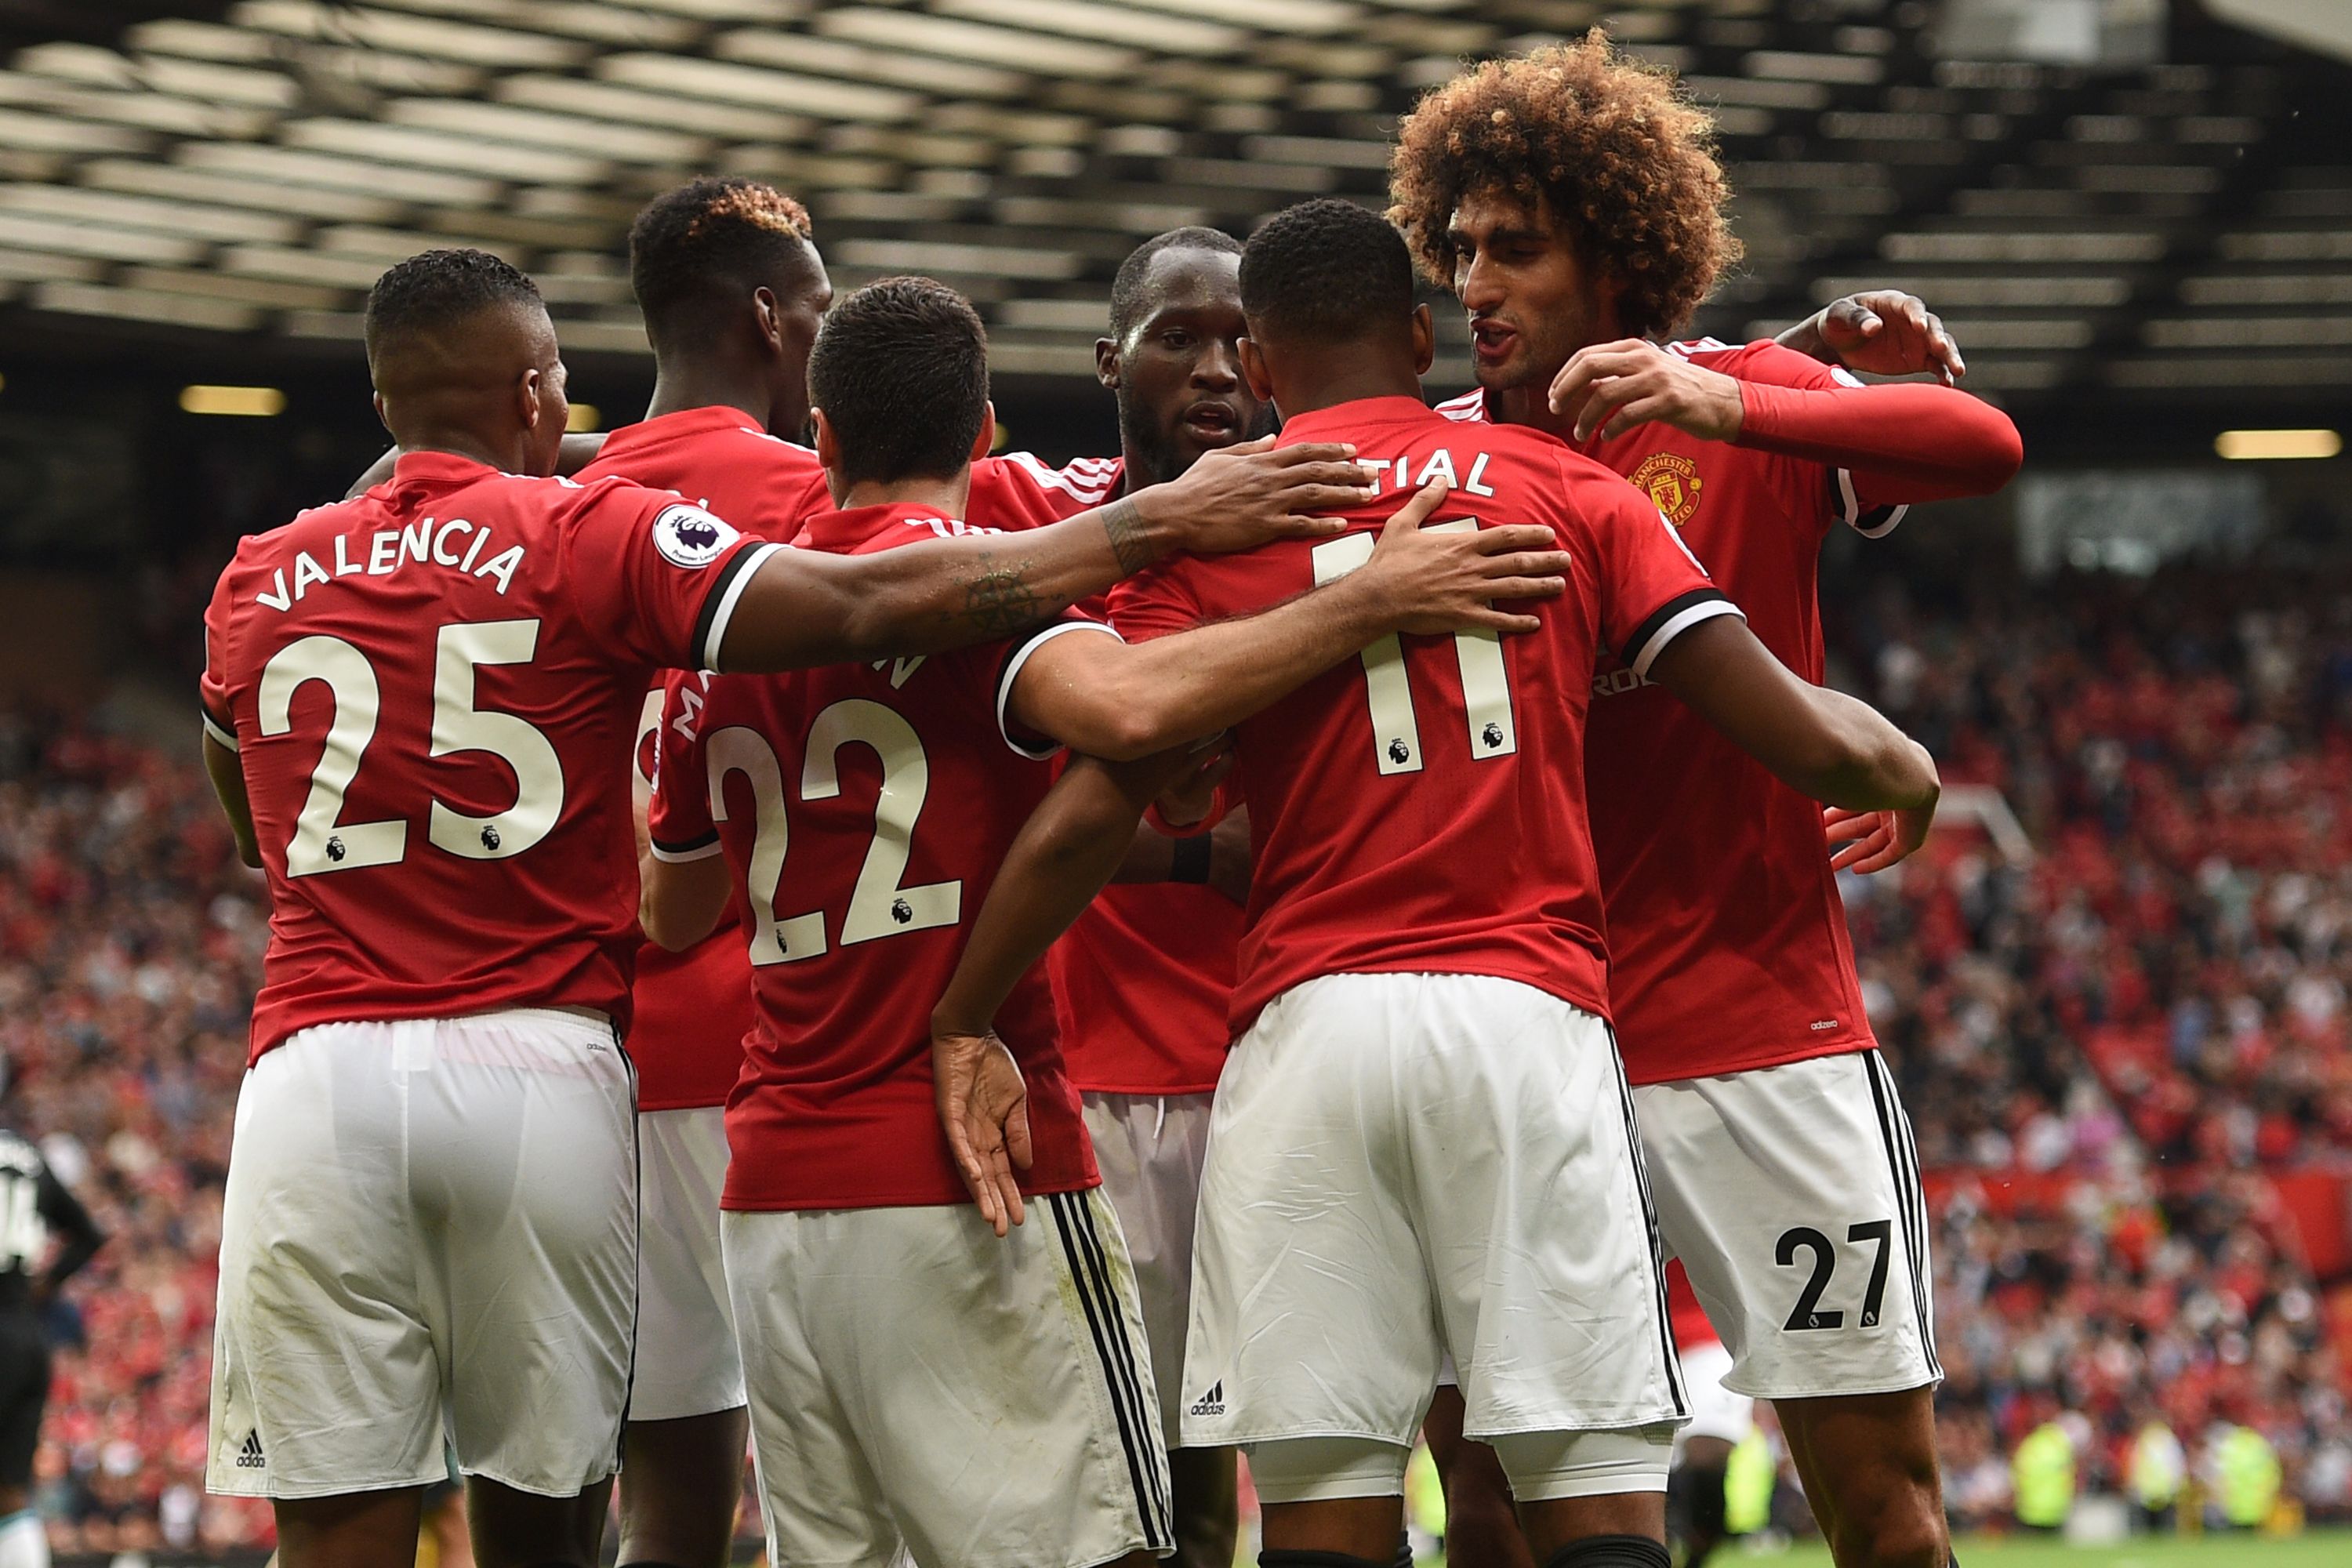 Manchester United's French striker Anthony Martial (2nd R) celebrates with teammates after scoring their third goal during the English Premier League football match between Manchester United and West Ham United at Old Trafford in Manchester, north west England, on August 13, 2017.
Manchester United won the game 4-0. / AFP PHOTO / Oli SCARFF / RESTRICTED TO EDITORIAL USE. No use with unauthorized audio, video, data, fixture lists, club/league logos or 'live' services. Online in-match use limited to 75 images, no video emulation. No use in betting, games or single club/league/player publications.  /         (Photo credit should read OLI SCARFF/AFP/Getty Images)